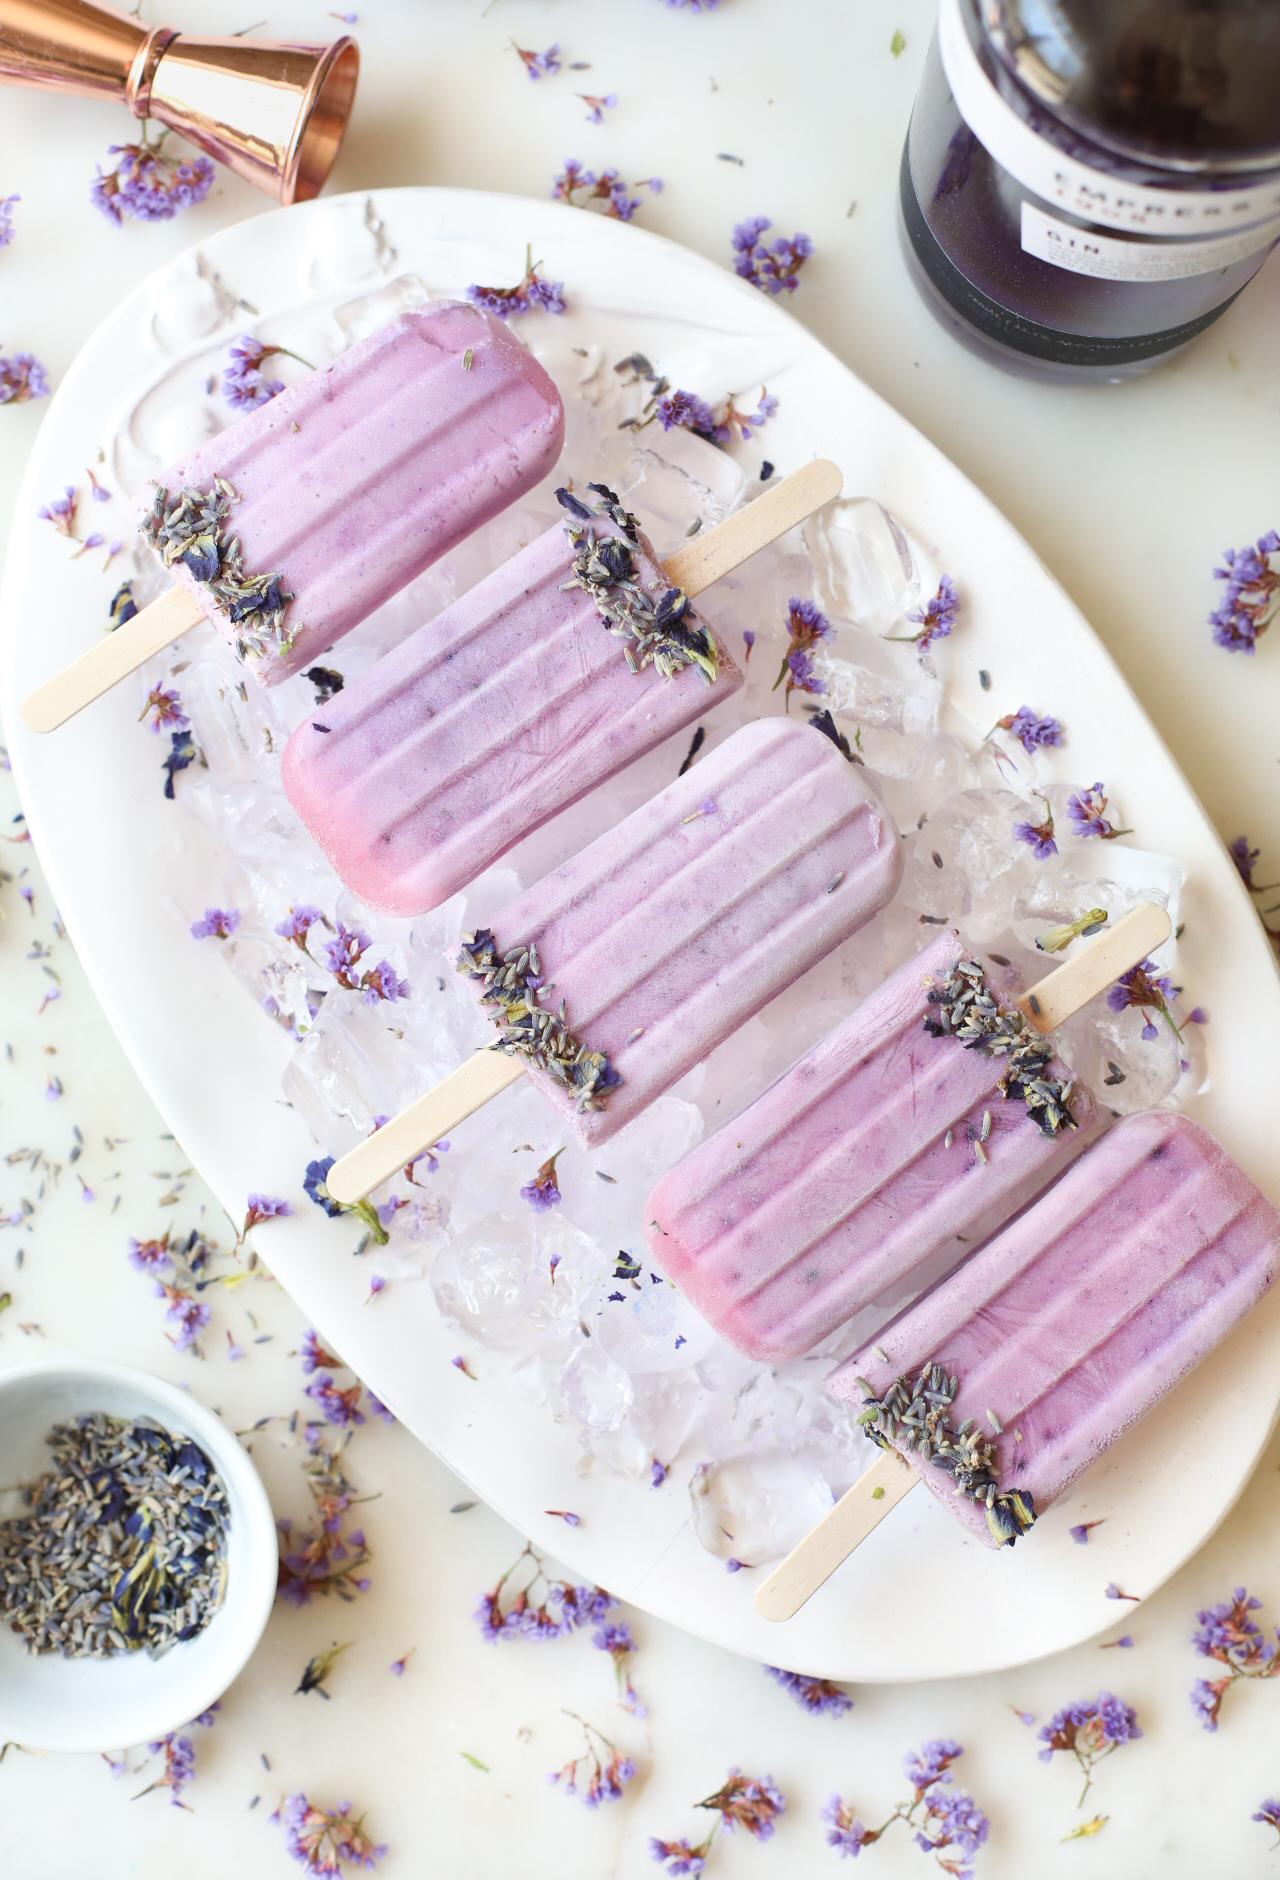 Boozy Lavender Blueberry Creamsicles made with Empress Gin